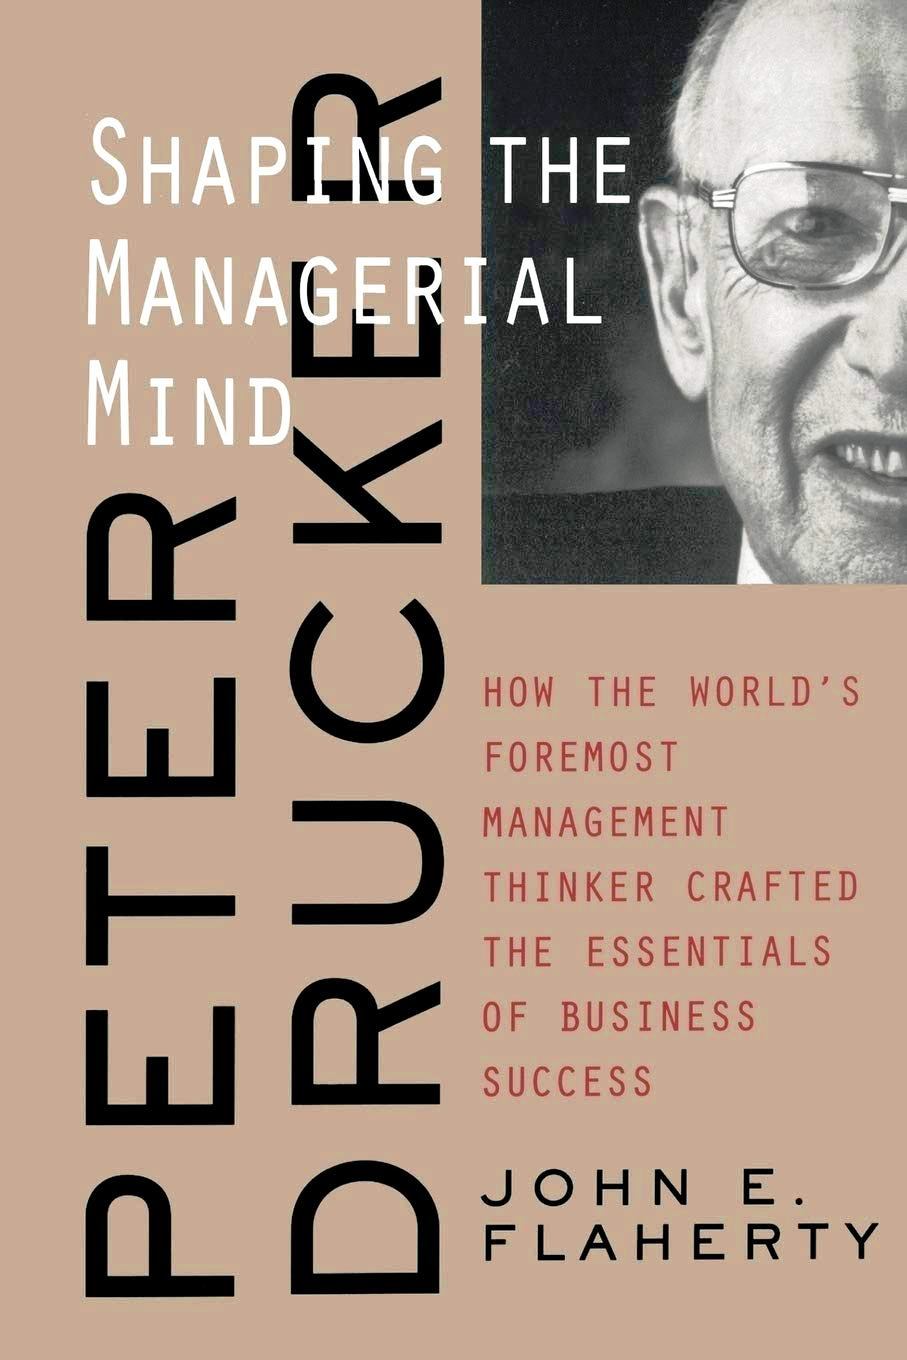 Peter Drucker: Shaping the Managerial Mind